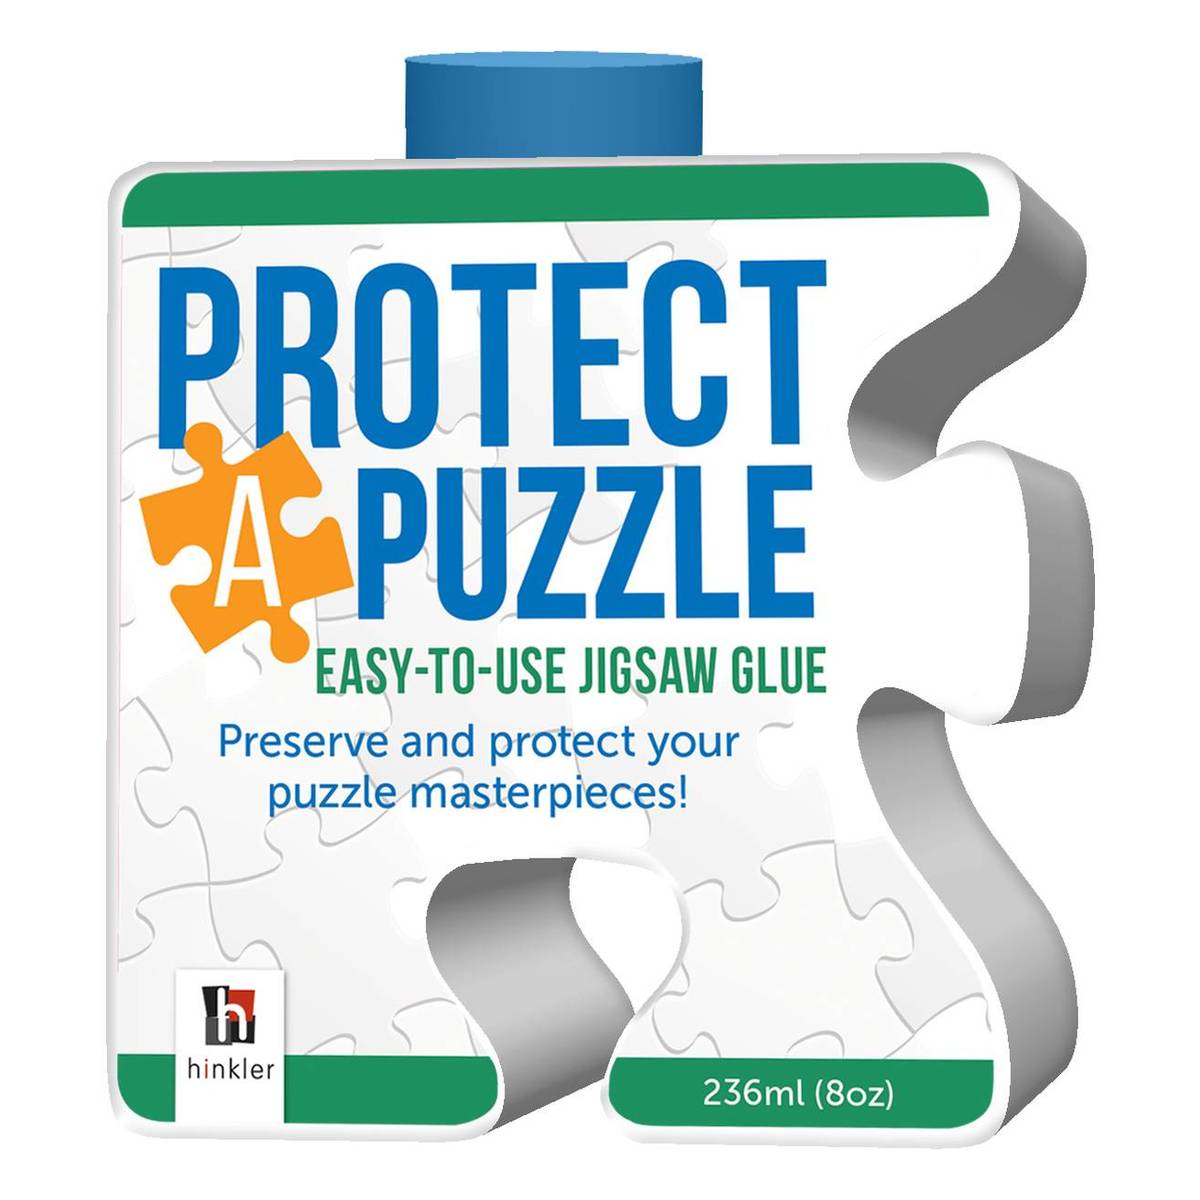 Save My Puzzle! Adhesive Puzzle Sheets